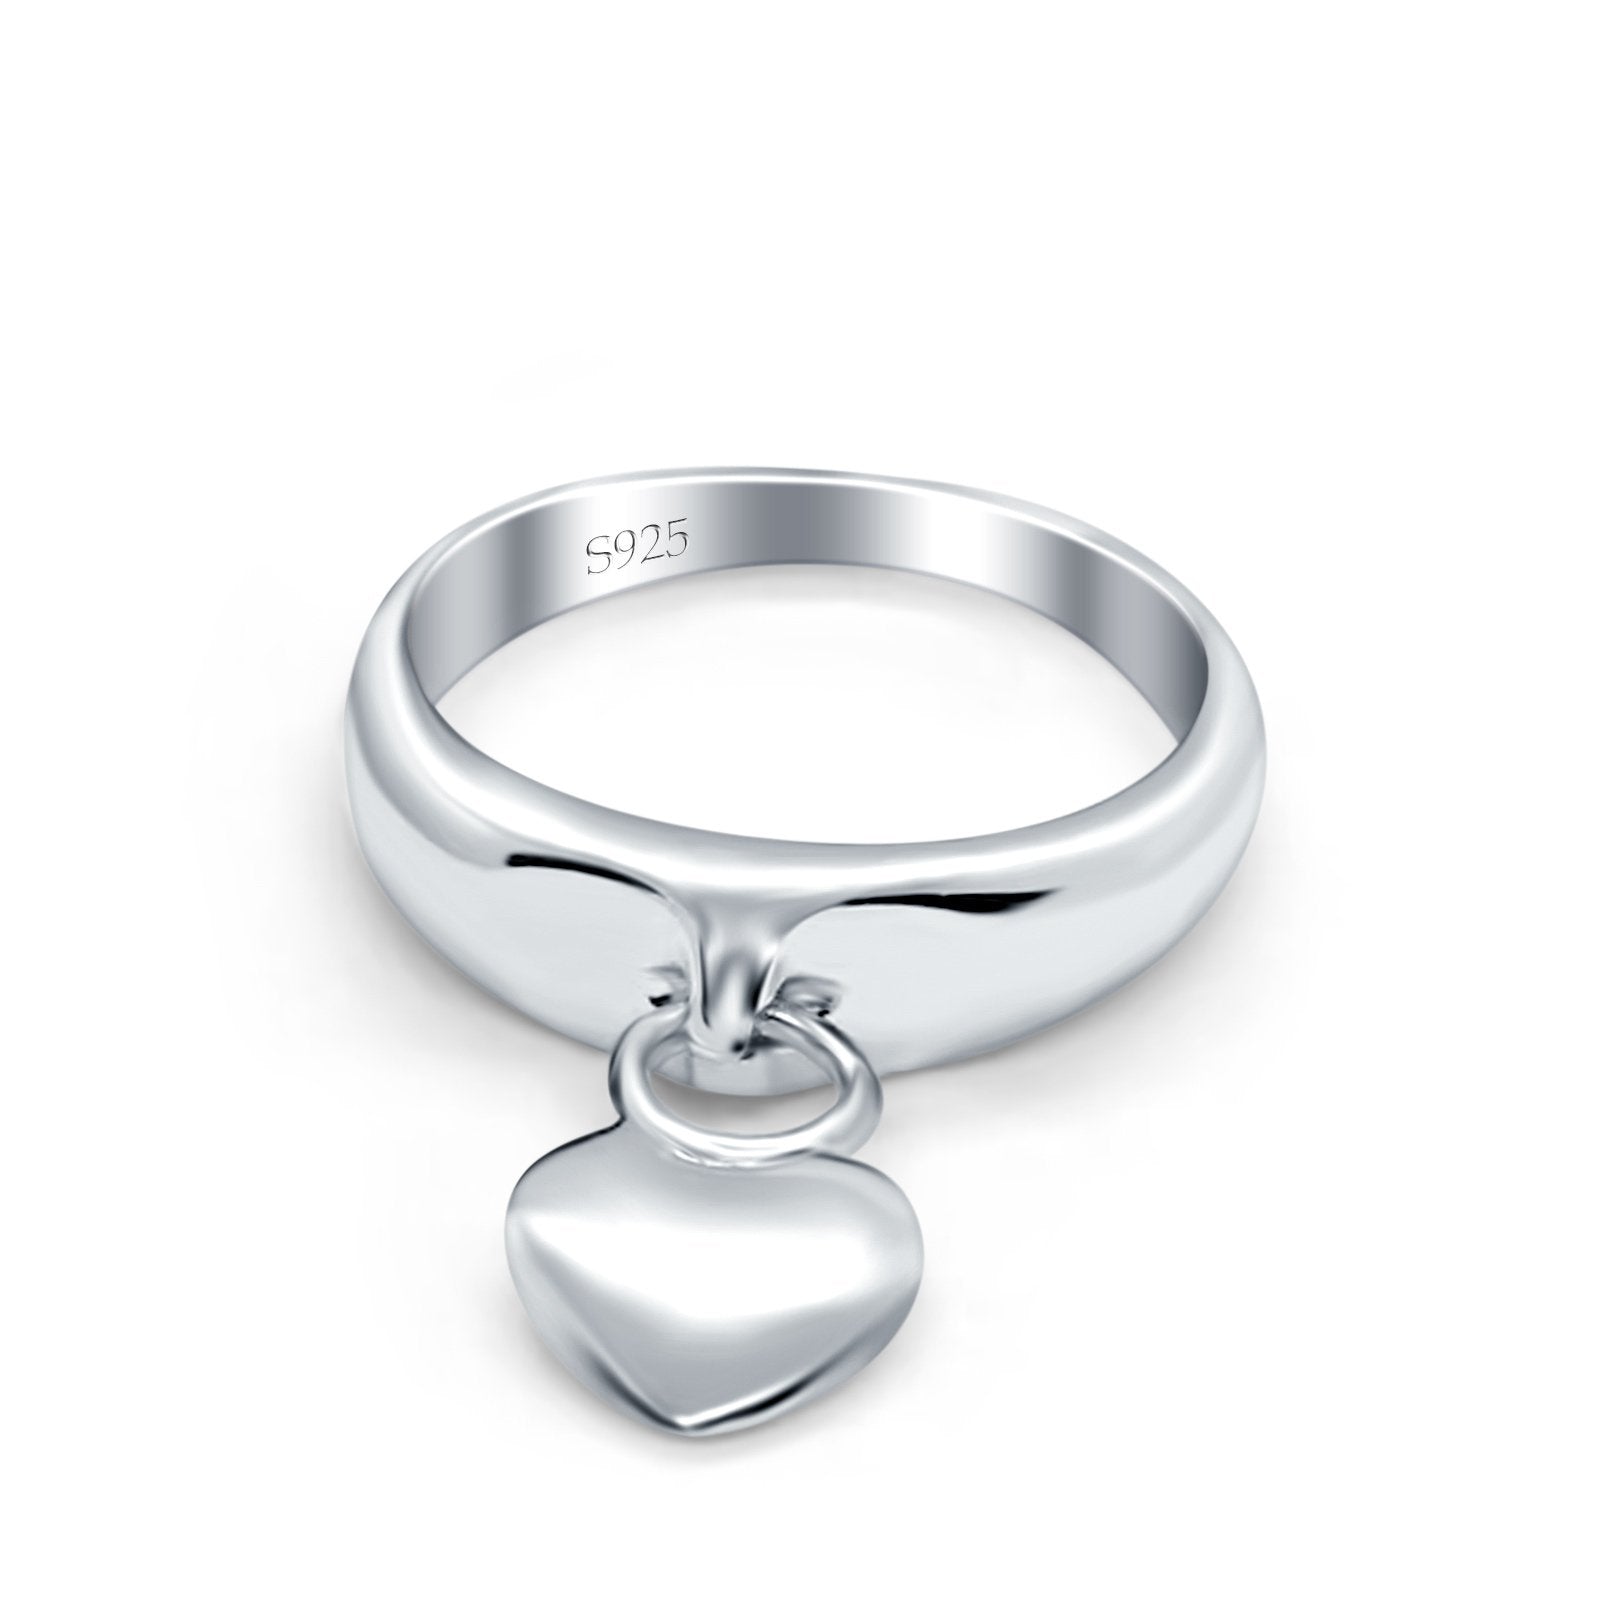 Heart Promise Charm Plain Ring Oxidized Band Solid 925 Sterling Silver